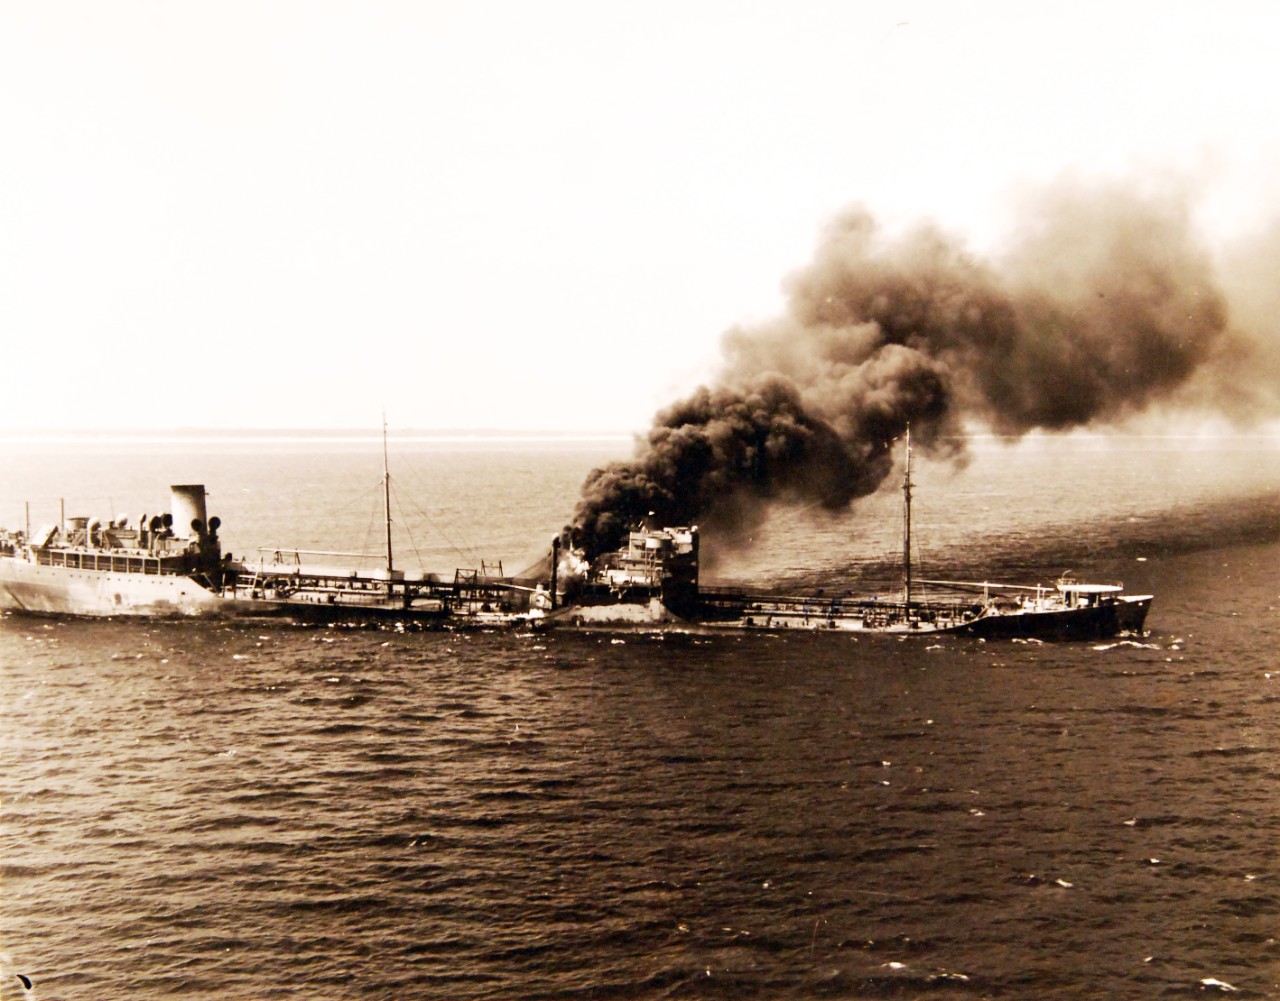 80-G-14047:    German U-boat attacks, 1942.   SS Robert C. Tuttle on fire off Cape Henry after torpedoing starboard side, June 22, 1942.   Tuttle entered into a minefield laid by U-701 off Virginia Beach.    Official U.S. Navy Photograph, now in the collections of the National Archives.  (2017/07/25). 